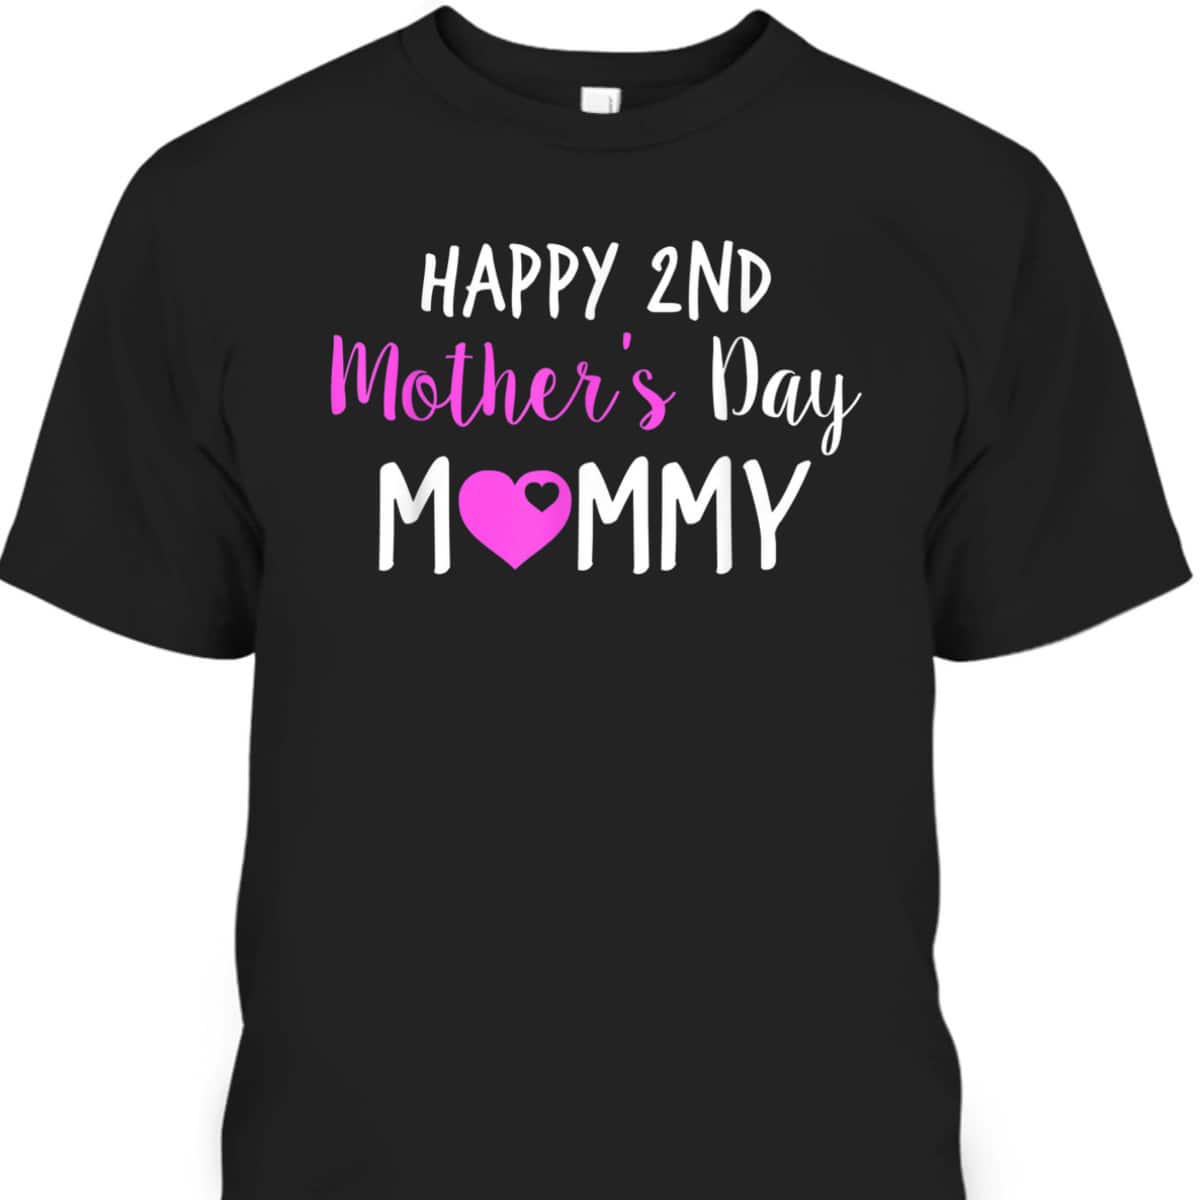 Happy 2nd Mother's Day Mommy T-Shirt